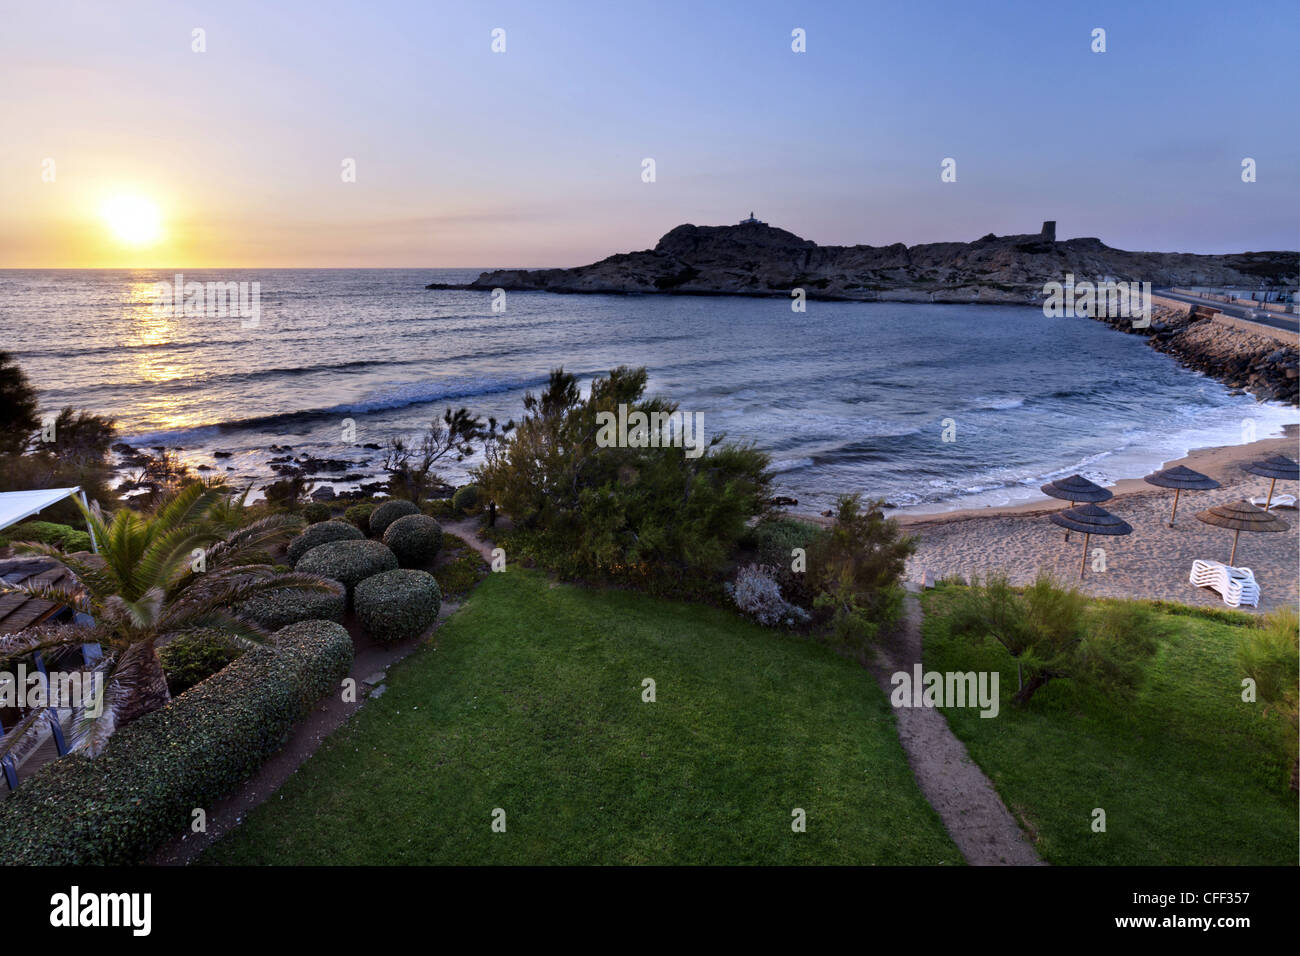 The beach and the peninsula of Ile Rousse at sunset, Corsica, France Stock Photo